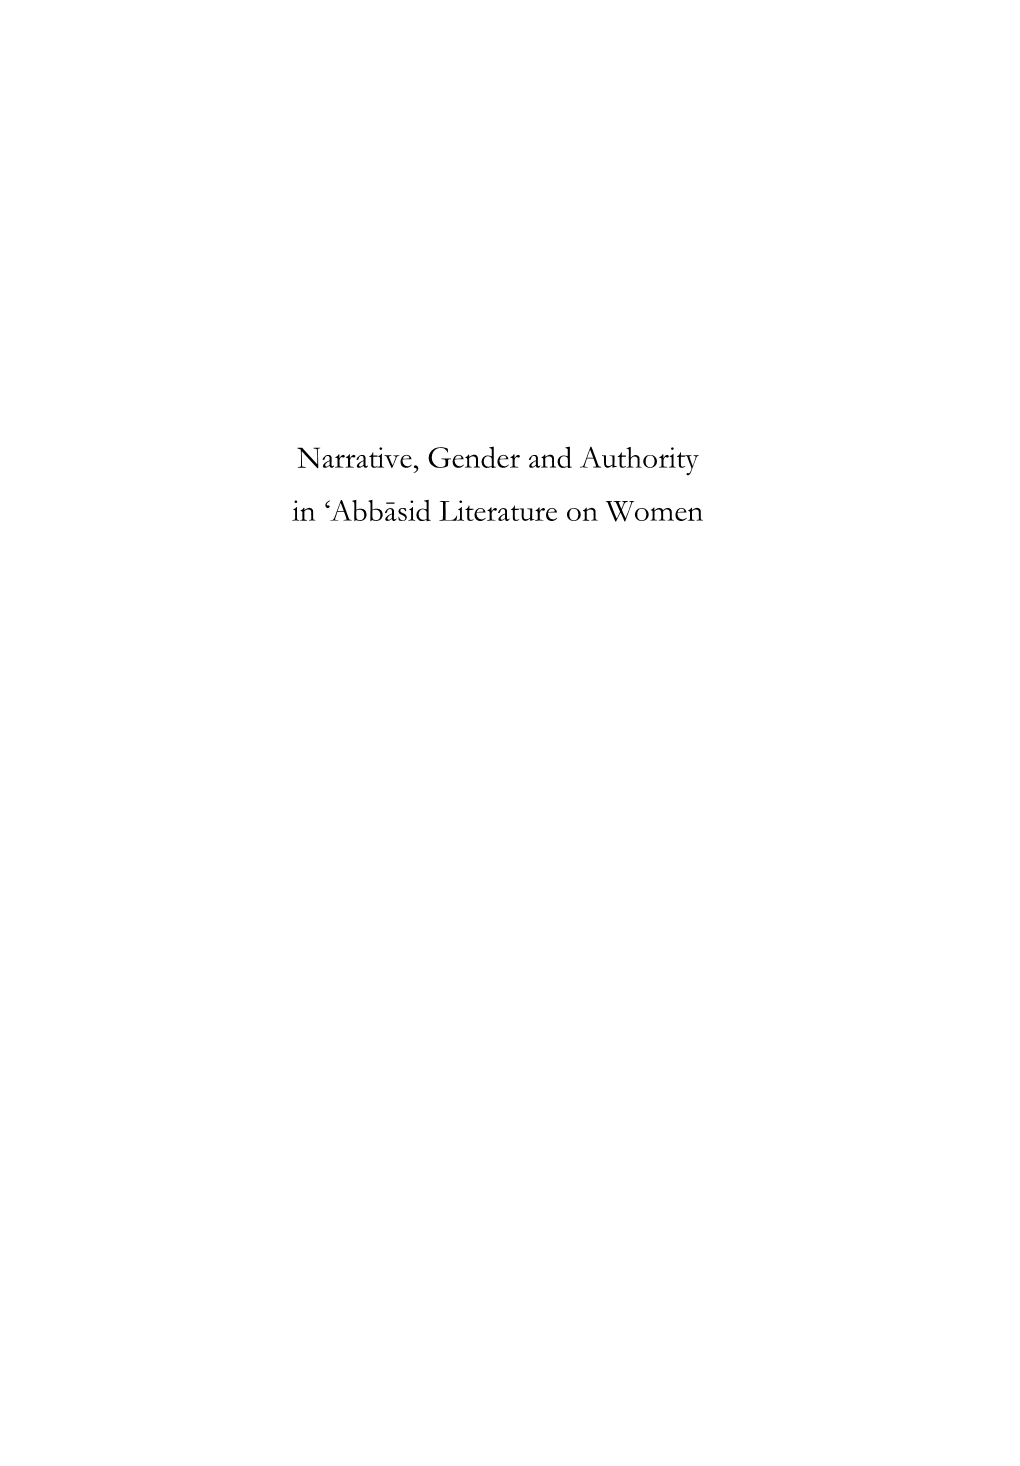 Narrative, Gender and Authority in ‘Abbāsid Literature on Women